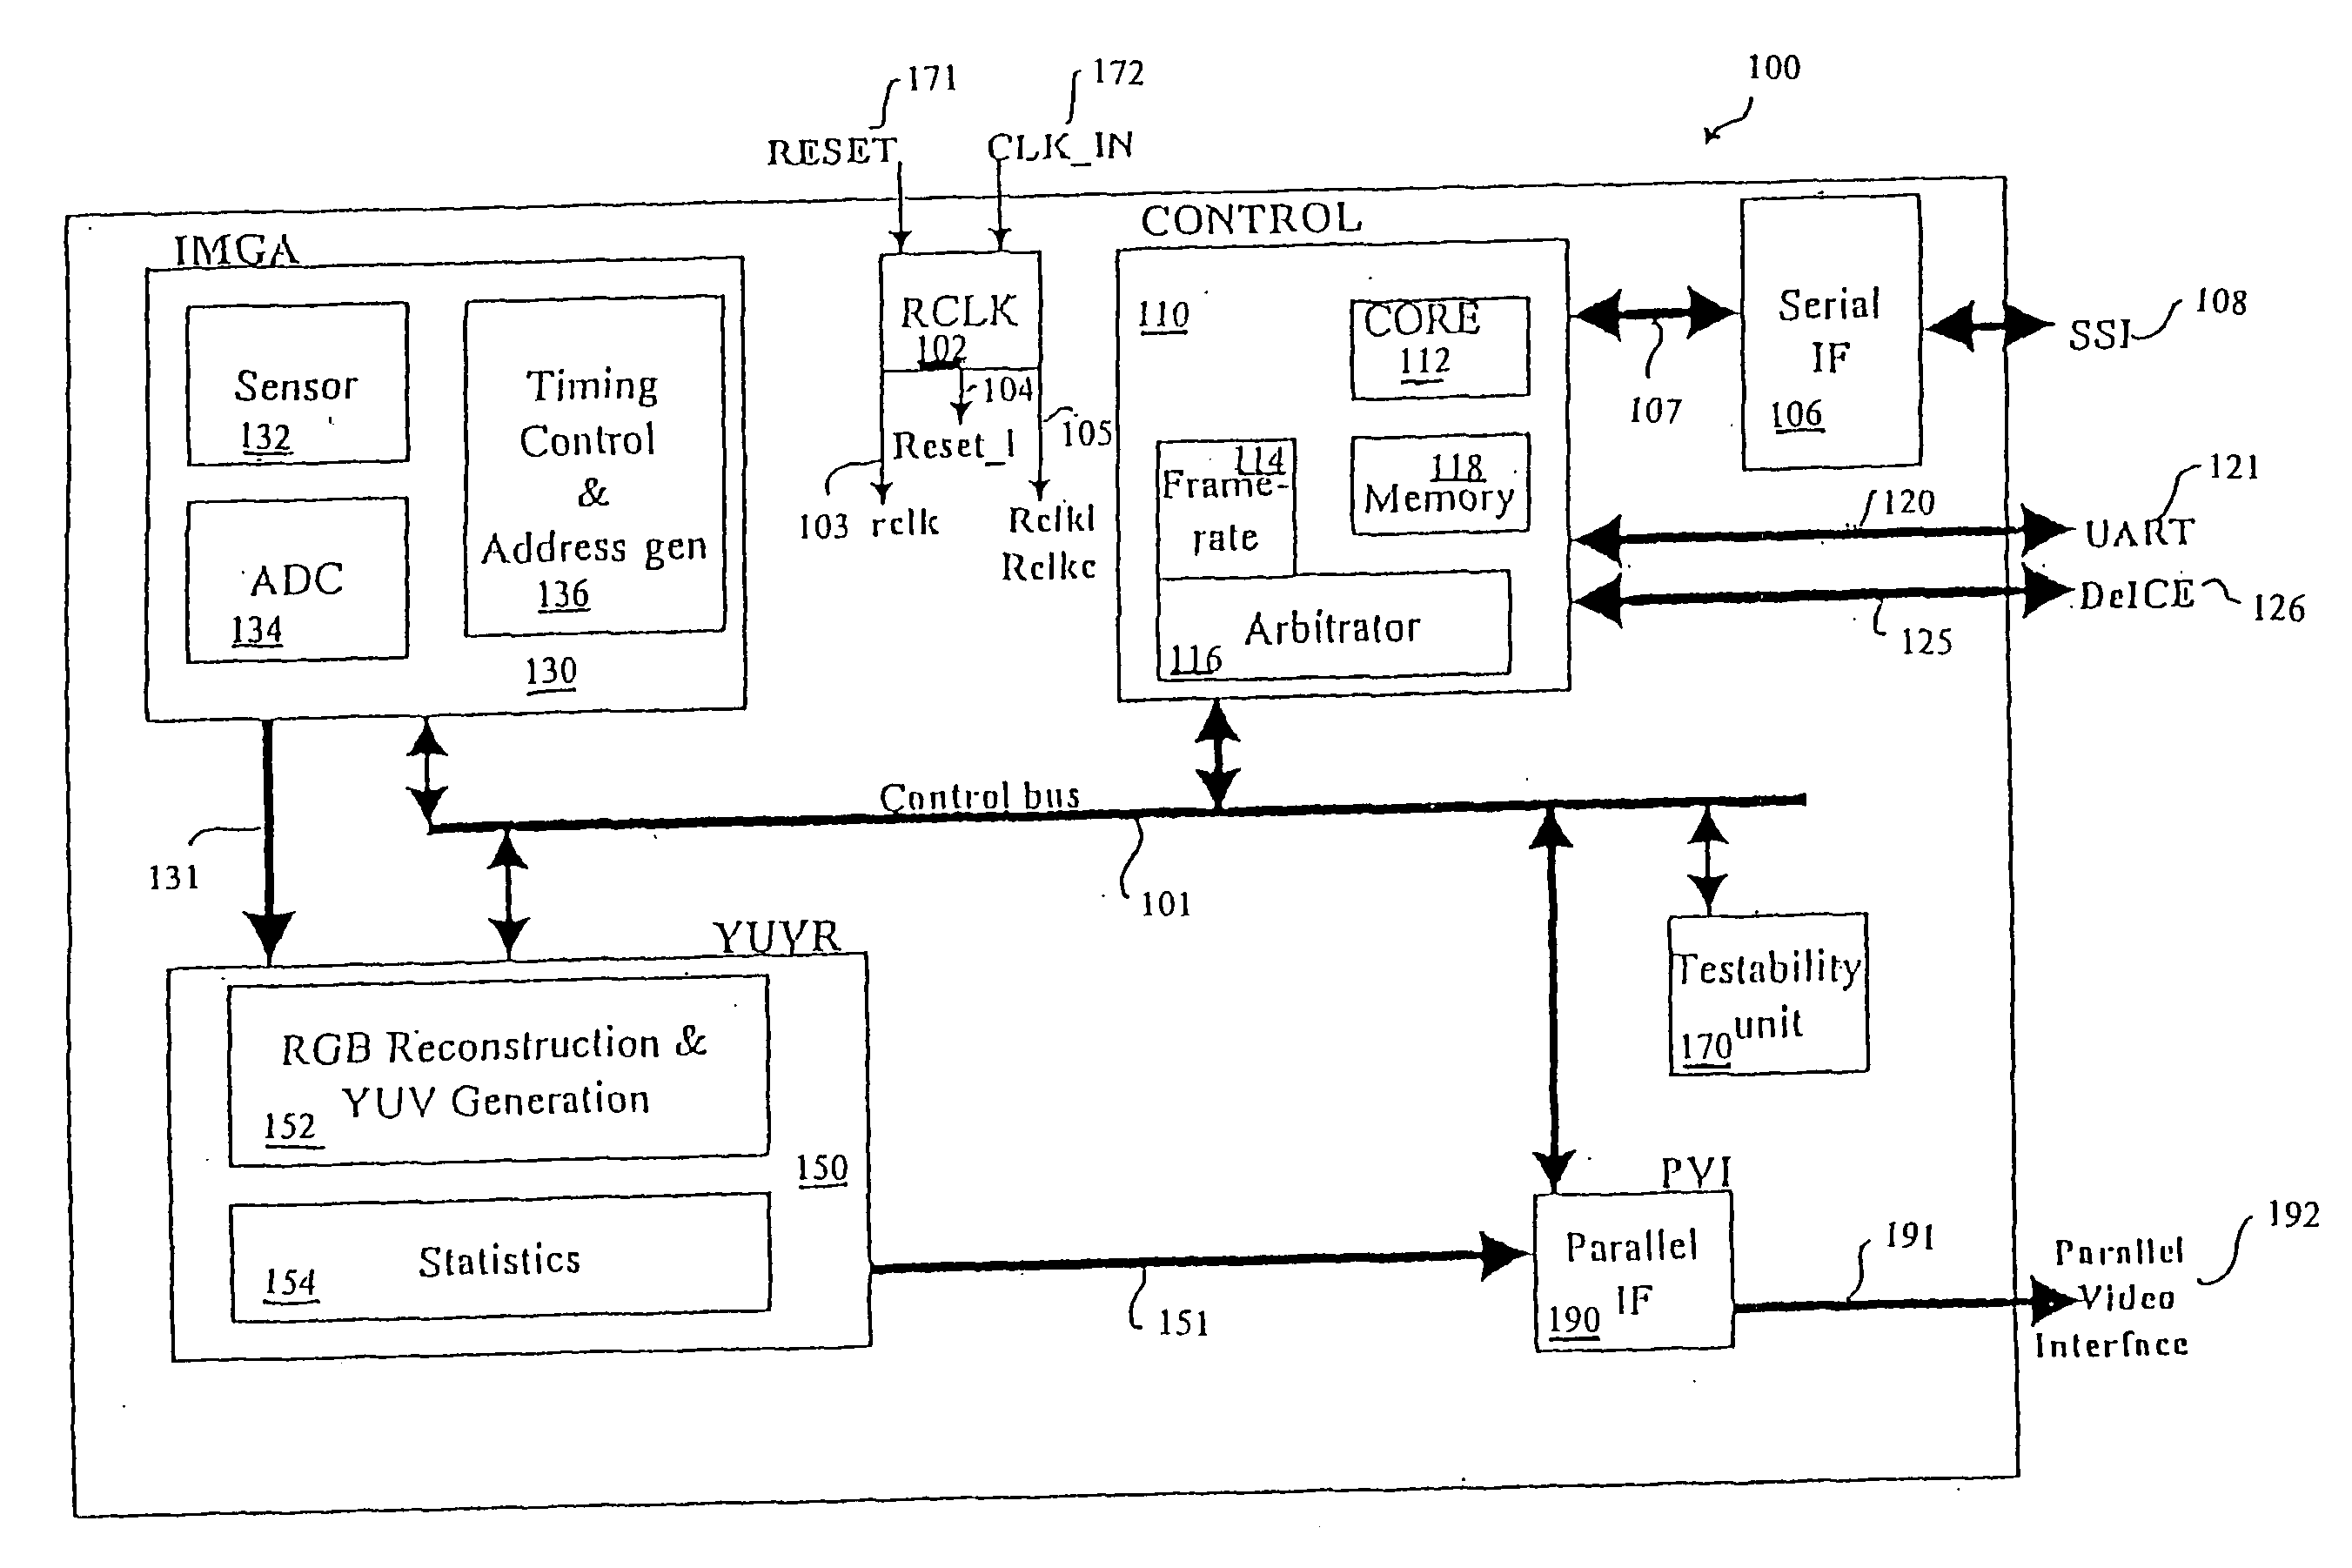 CMOS imager for cellular applications and methods of using such